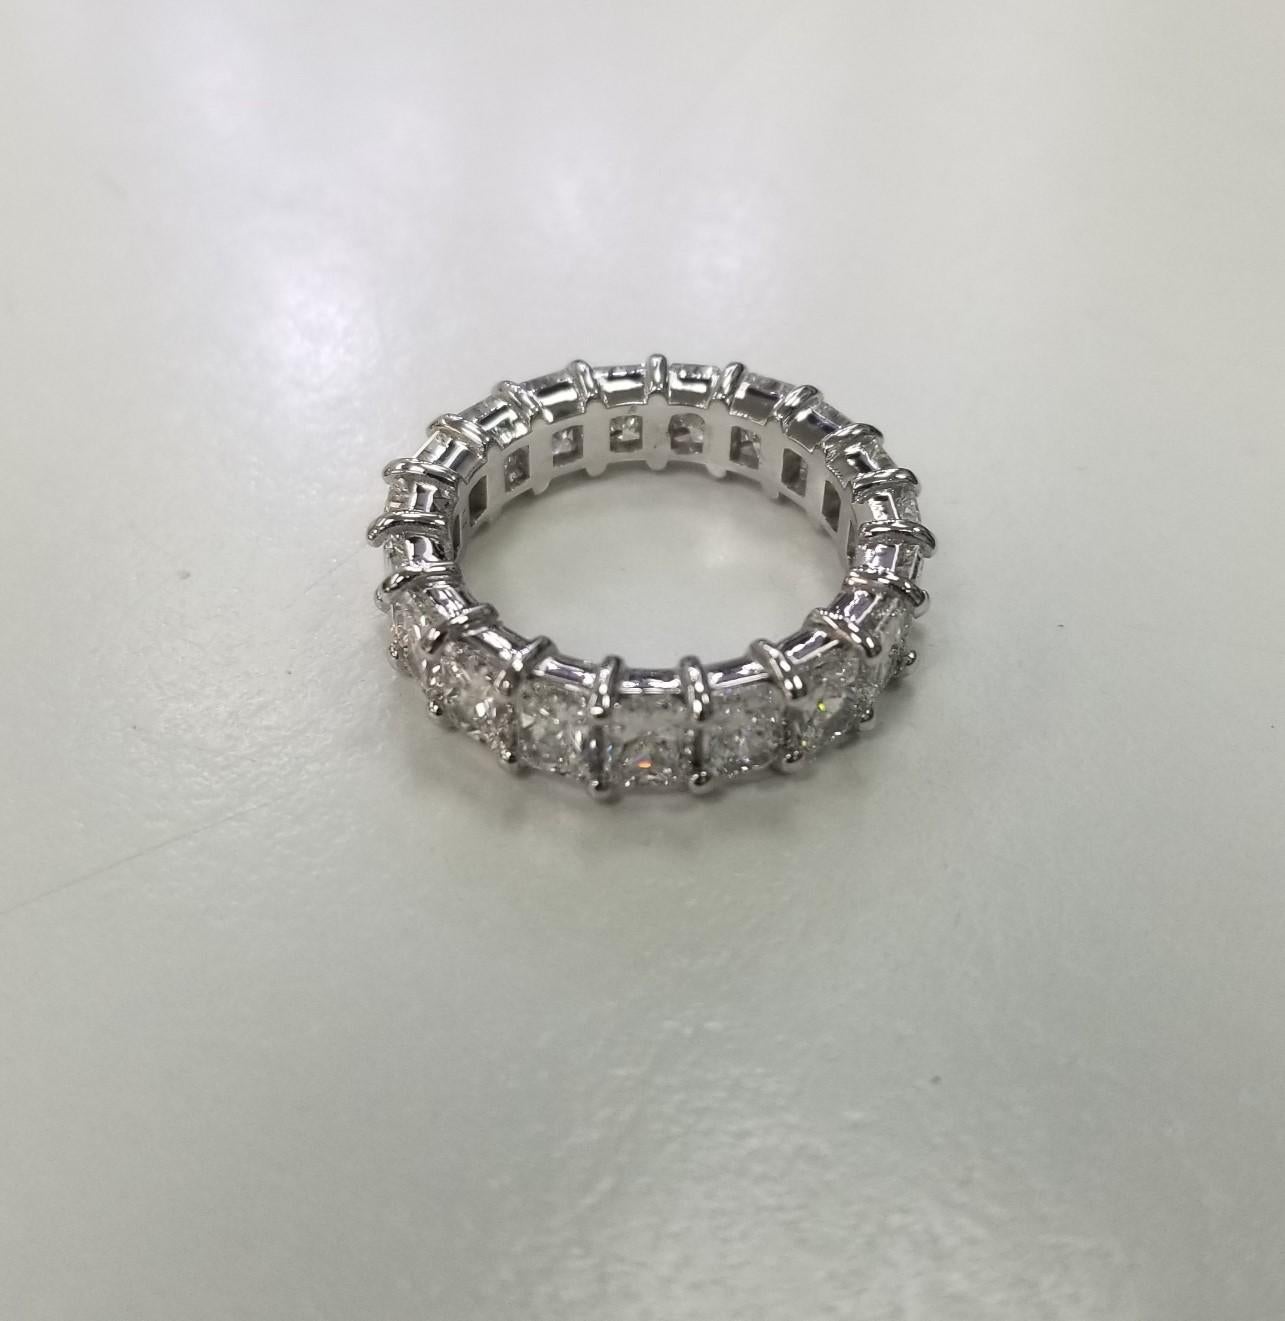 Specifications:
    main stone: RADIANT CUT DIAMOND
    DIAMONDS:19 PCS
    carat total weight: 6.03 CARAT TOTAL WEIGHT
    color: G
    clarity: VS1
    brand: NONE
    metal:14K WHITE GOLD
    type:ETERNITY ring
    weight: 5.8 GrS
    size:6.75